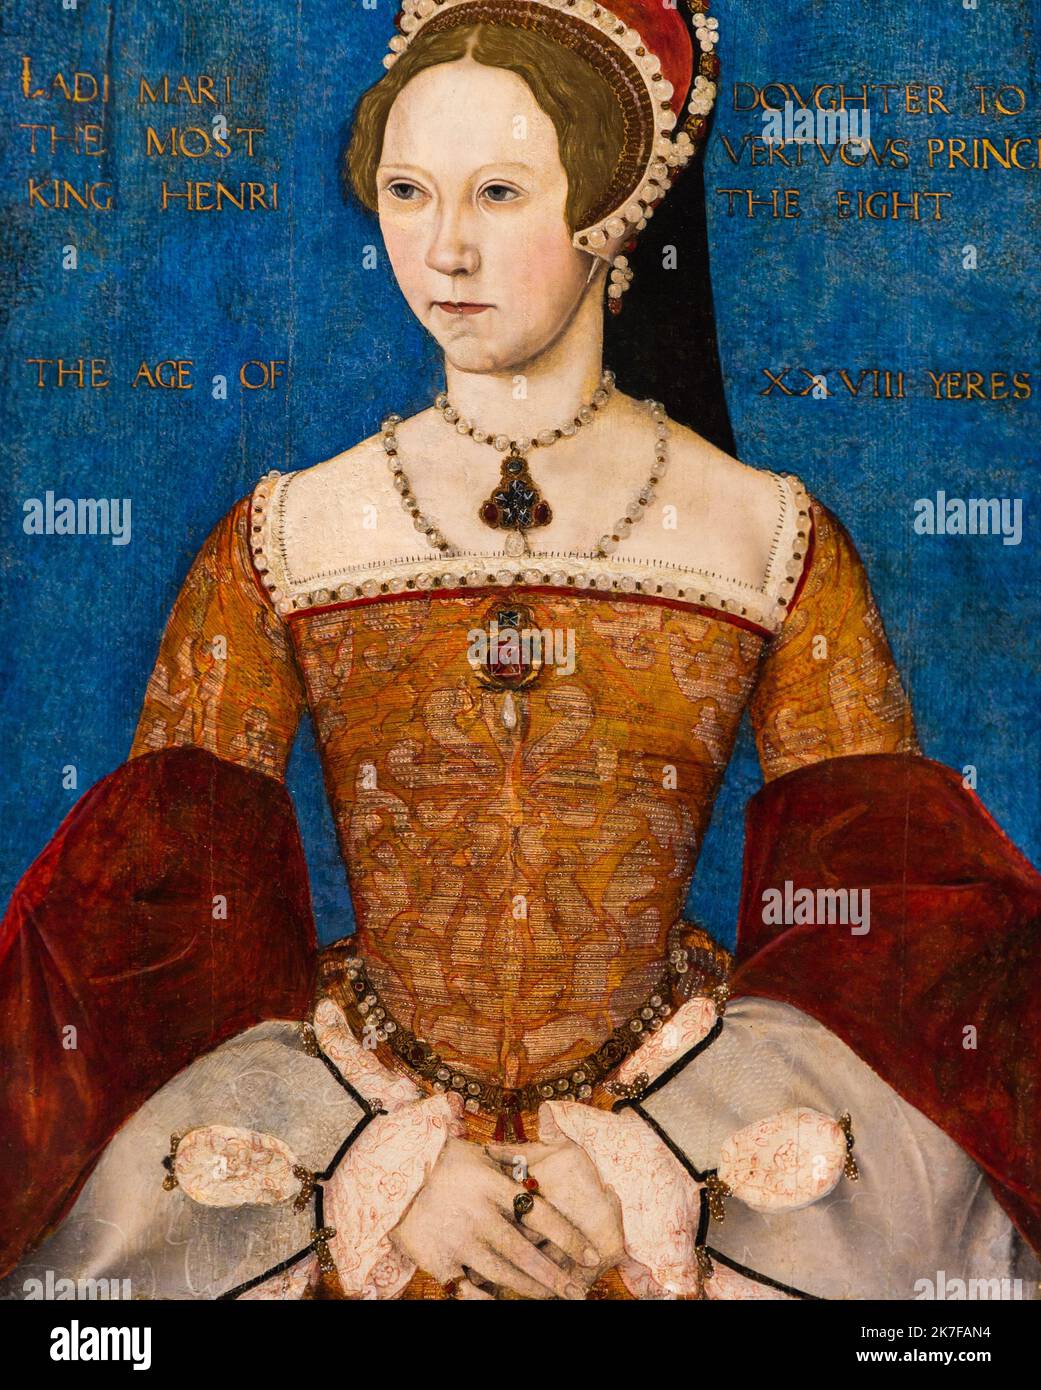 ©Active Museu/MAXPPP - ActiveMuseum 0003624.jpg / Marie I, la soeur de Henry VIII et de Catherine d'Aragon, 1544 - Master John 1544 - / Master John / Peinture Active Museum / Le Pictorium 1 person ,Background ,Blonde-haired ,Blue ,Blue eyes ,Catholic (adj and noun) ,Chest ,Dress ,Dynasty ,Face on ,Father ,Girl ,Gold (Precious metal) ,Headgear ,House of Tudor ,Jewel ,King ,King of England ,Low-cut ,Mother ,Necklace ,Nobility ,Of noble birth ,Pearl ,Pearl necklace ,Pendant ,Period ,Portrait ,Precious stone ,Queen ,Royal family ,Sister ,Spanish royal consorts ,Traditional headdress ,Tudor dynast Stock Photo